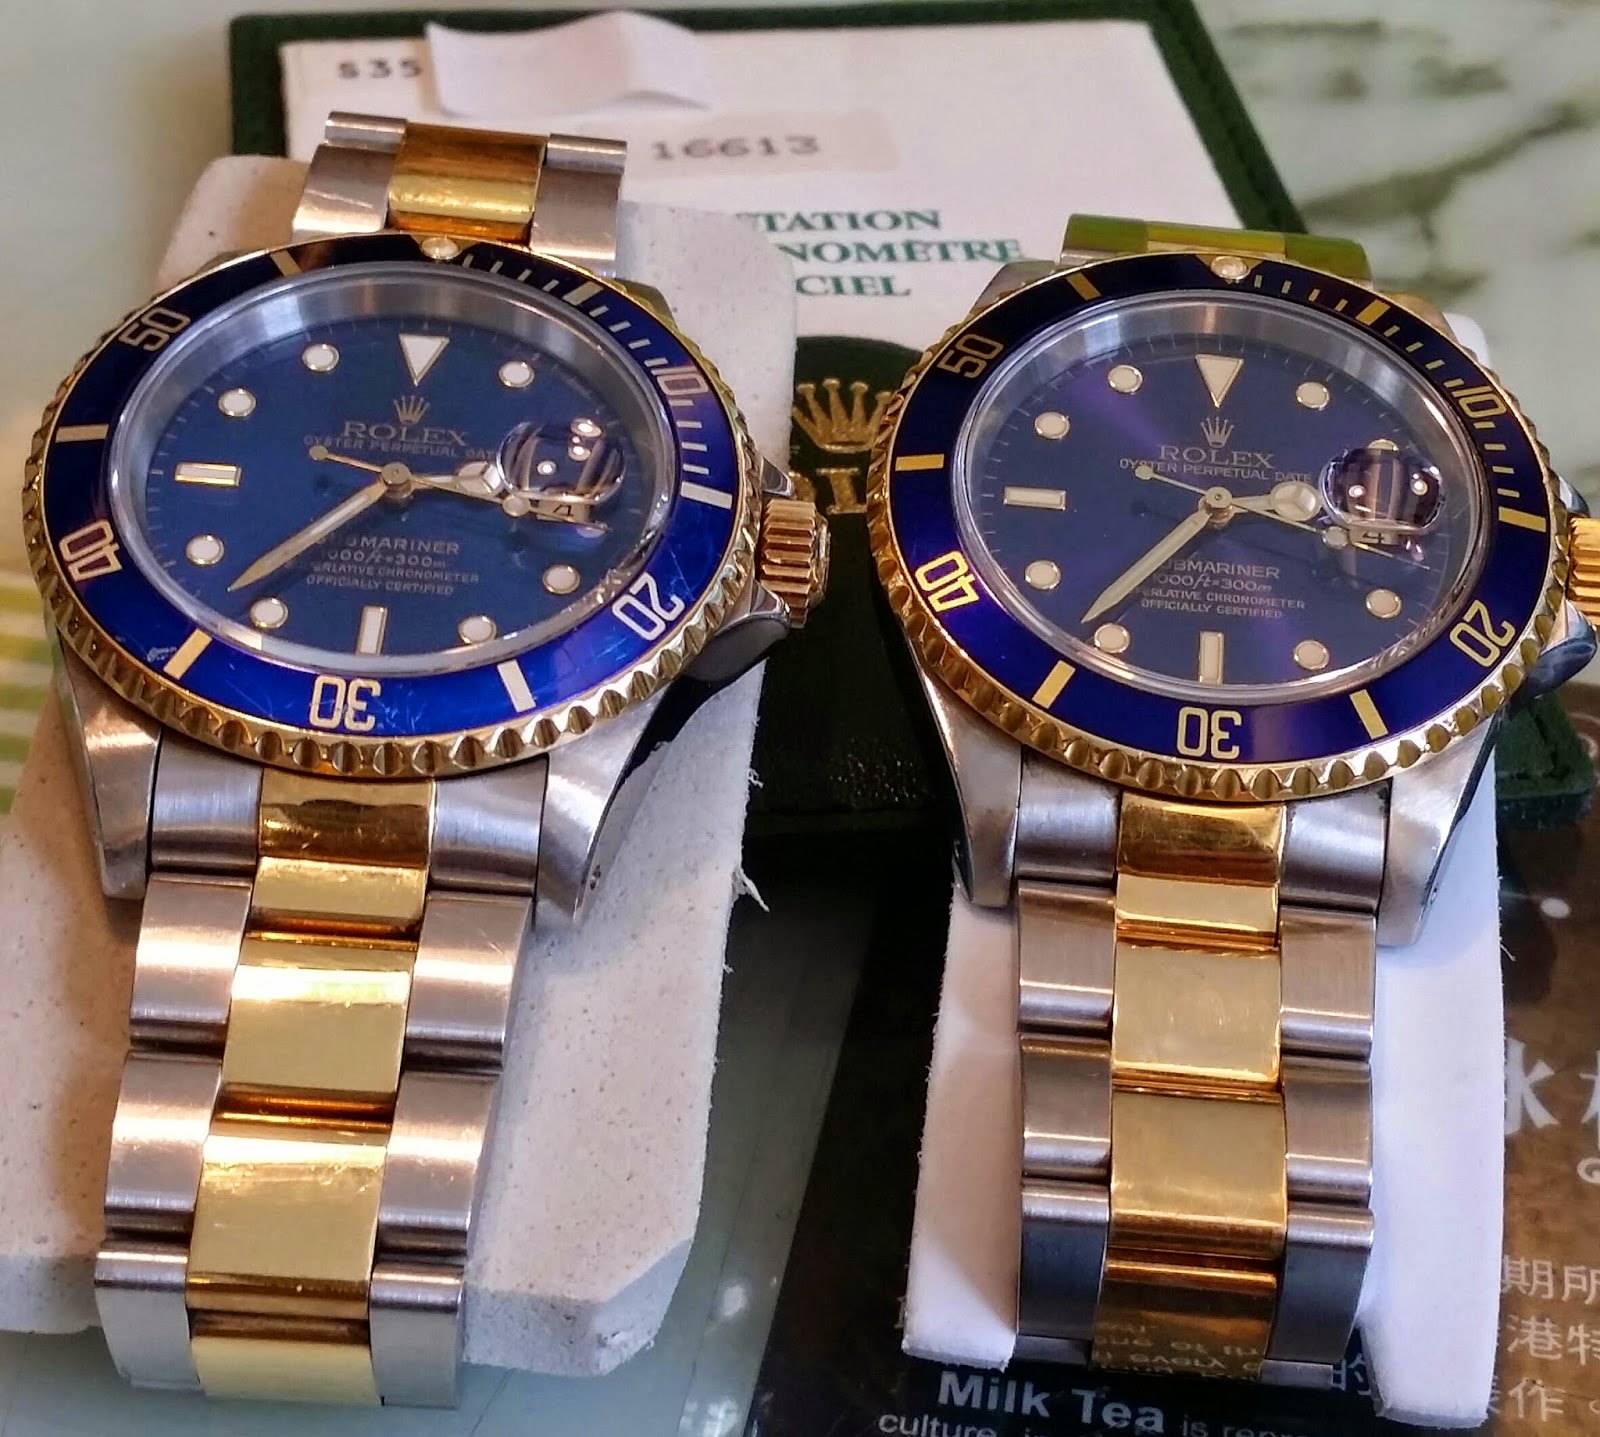 Hong Kong Watch Fever 香港勞友: Rolex Ref 16613 Submariner Two Tone on Sale